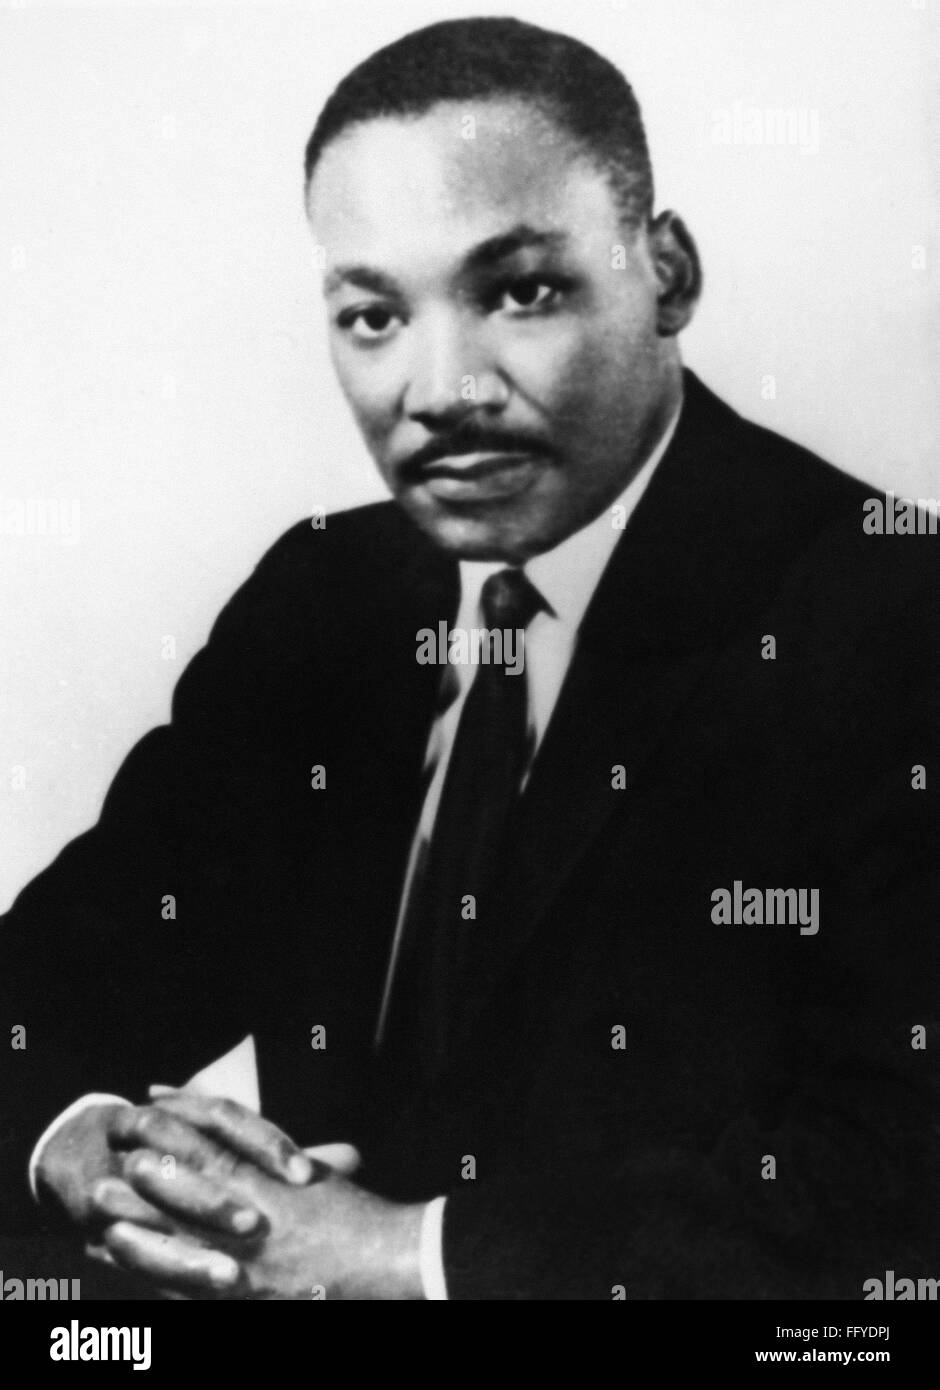 MARTIN LUTHER KING, JR. /n(1929-1968). American clergyman and civil rights leader. Undated photograph. Stock Photo